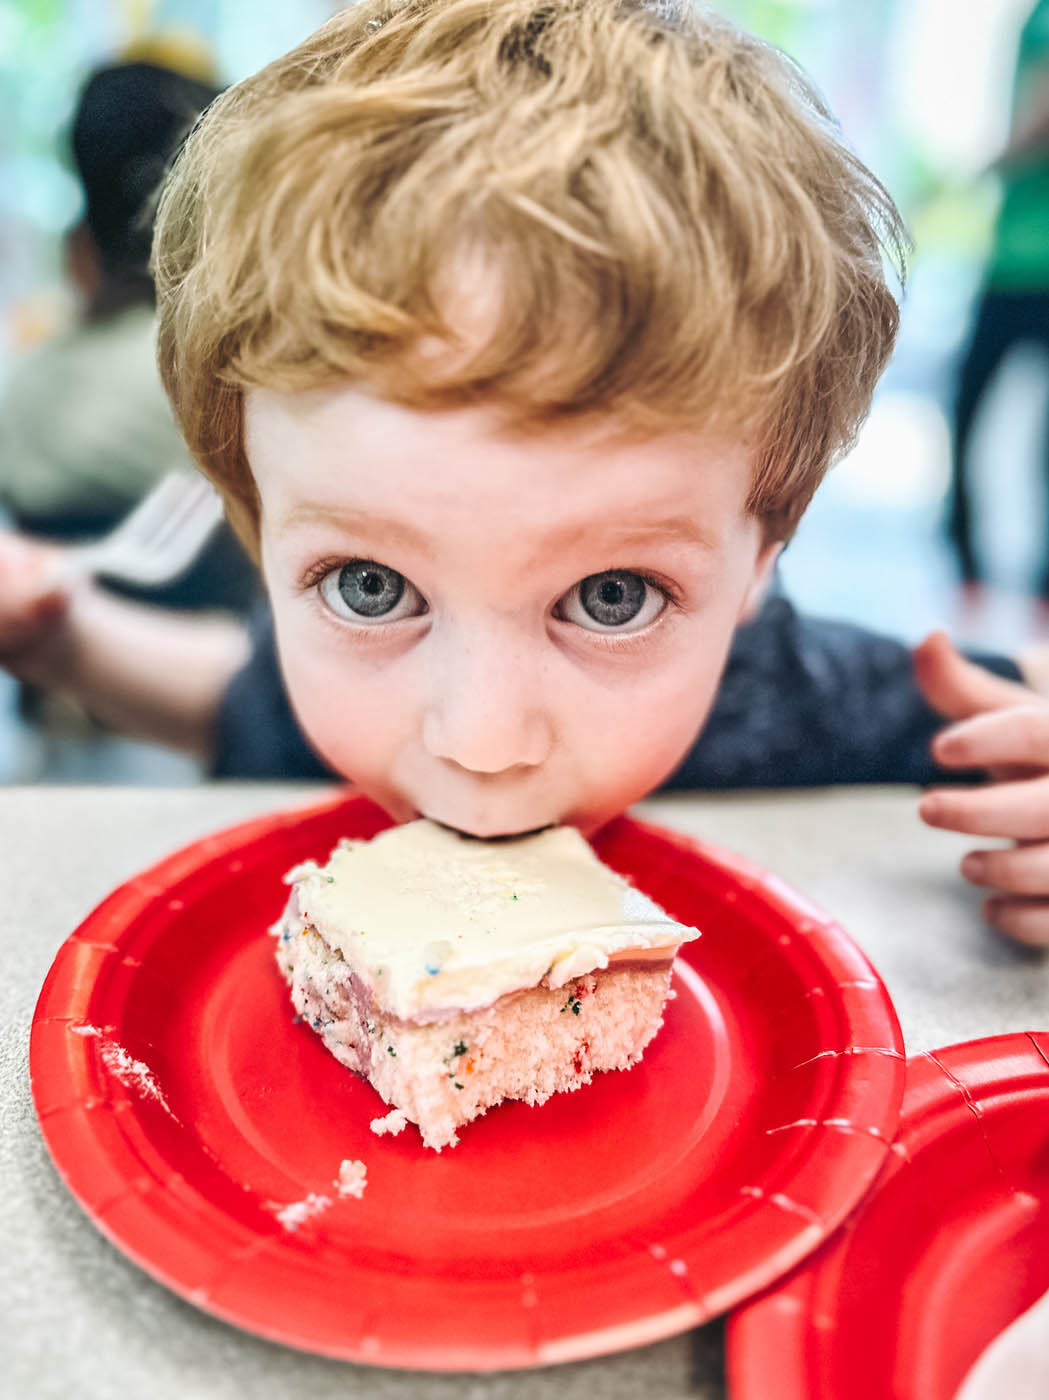 A kid taking a big bite out of a cake piece at Romp n' Roll - a children's party place in Willow Grove, PA.